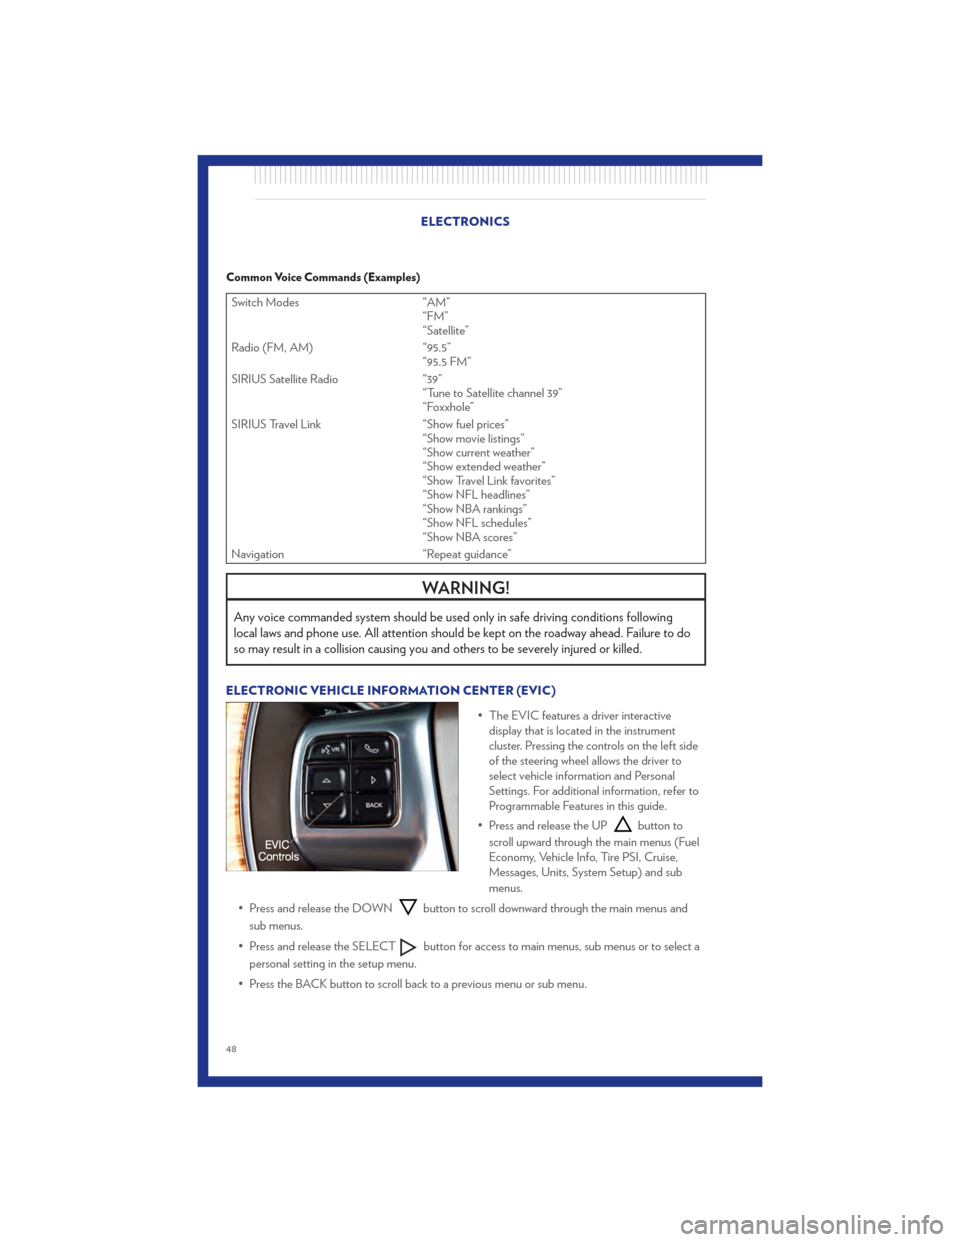 CHRYSLER 300 2011 2.G Owners Manual Common Voice Commands (Examples)
Switch Modes“AM”
“FM”
“Satellite”
Radio (FM, AM) “95.5”
“95.5 FM”
SIRIUS Satellite Radio “39”
“Tune to Satellite channel 39”
“Foxxhole”